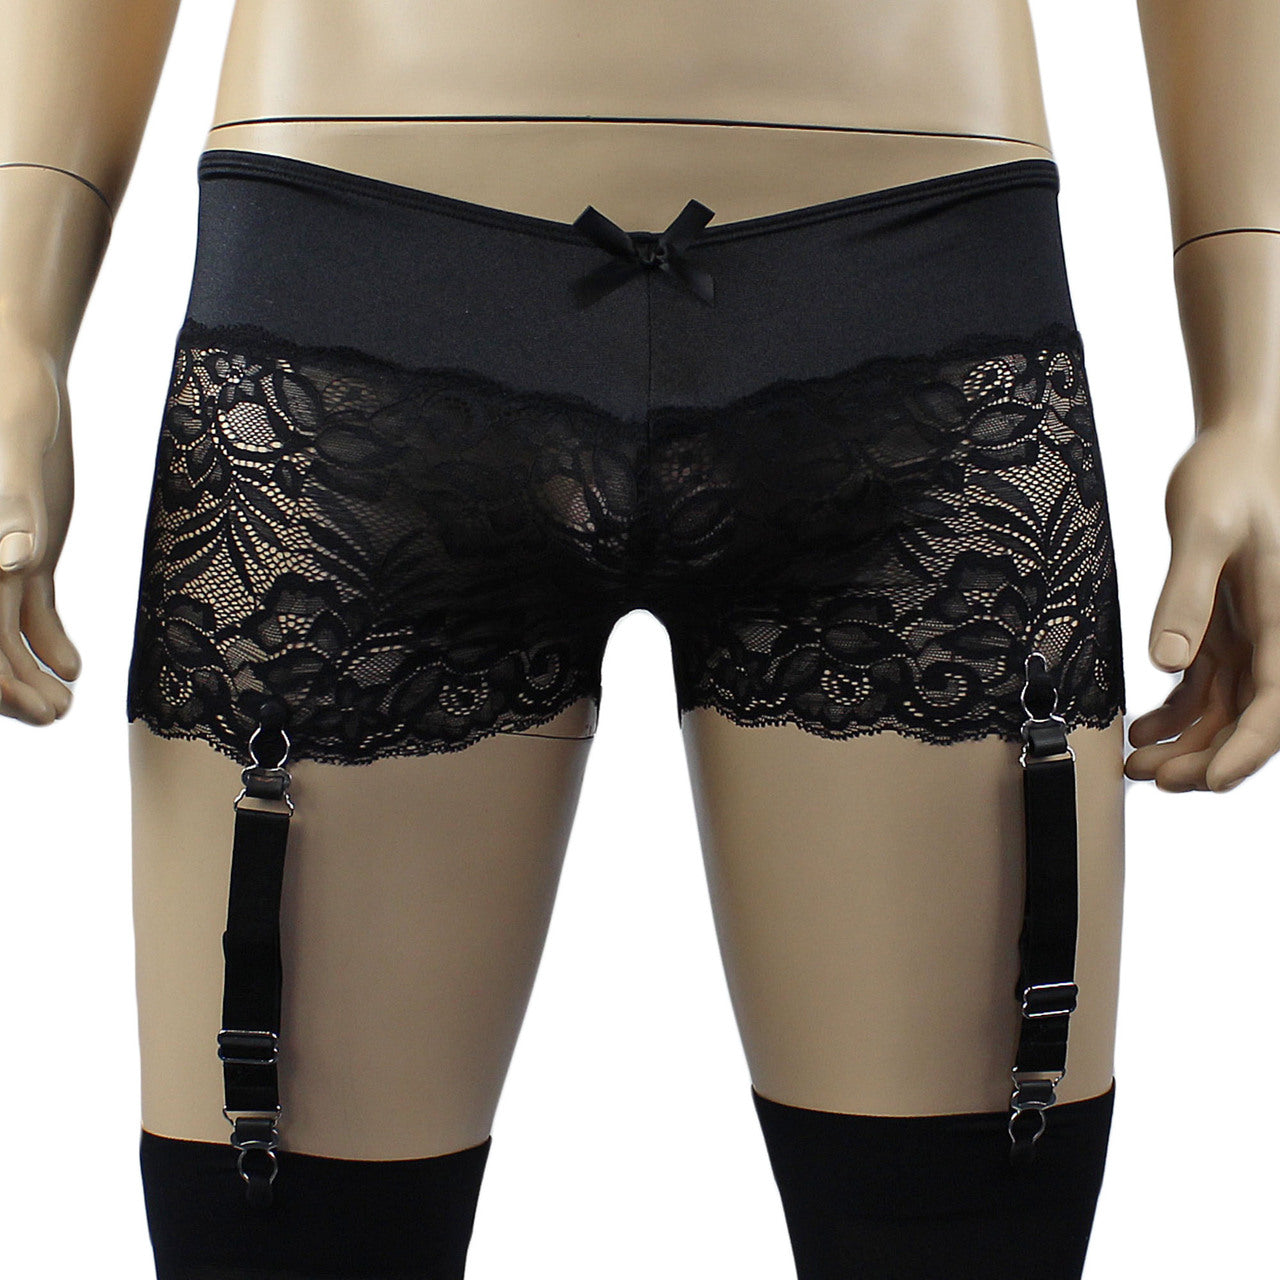 Mens Risque Boxer Briefs with Detachable Garters & Stockings Black and Black Lace